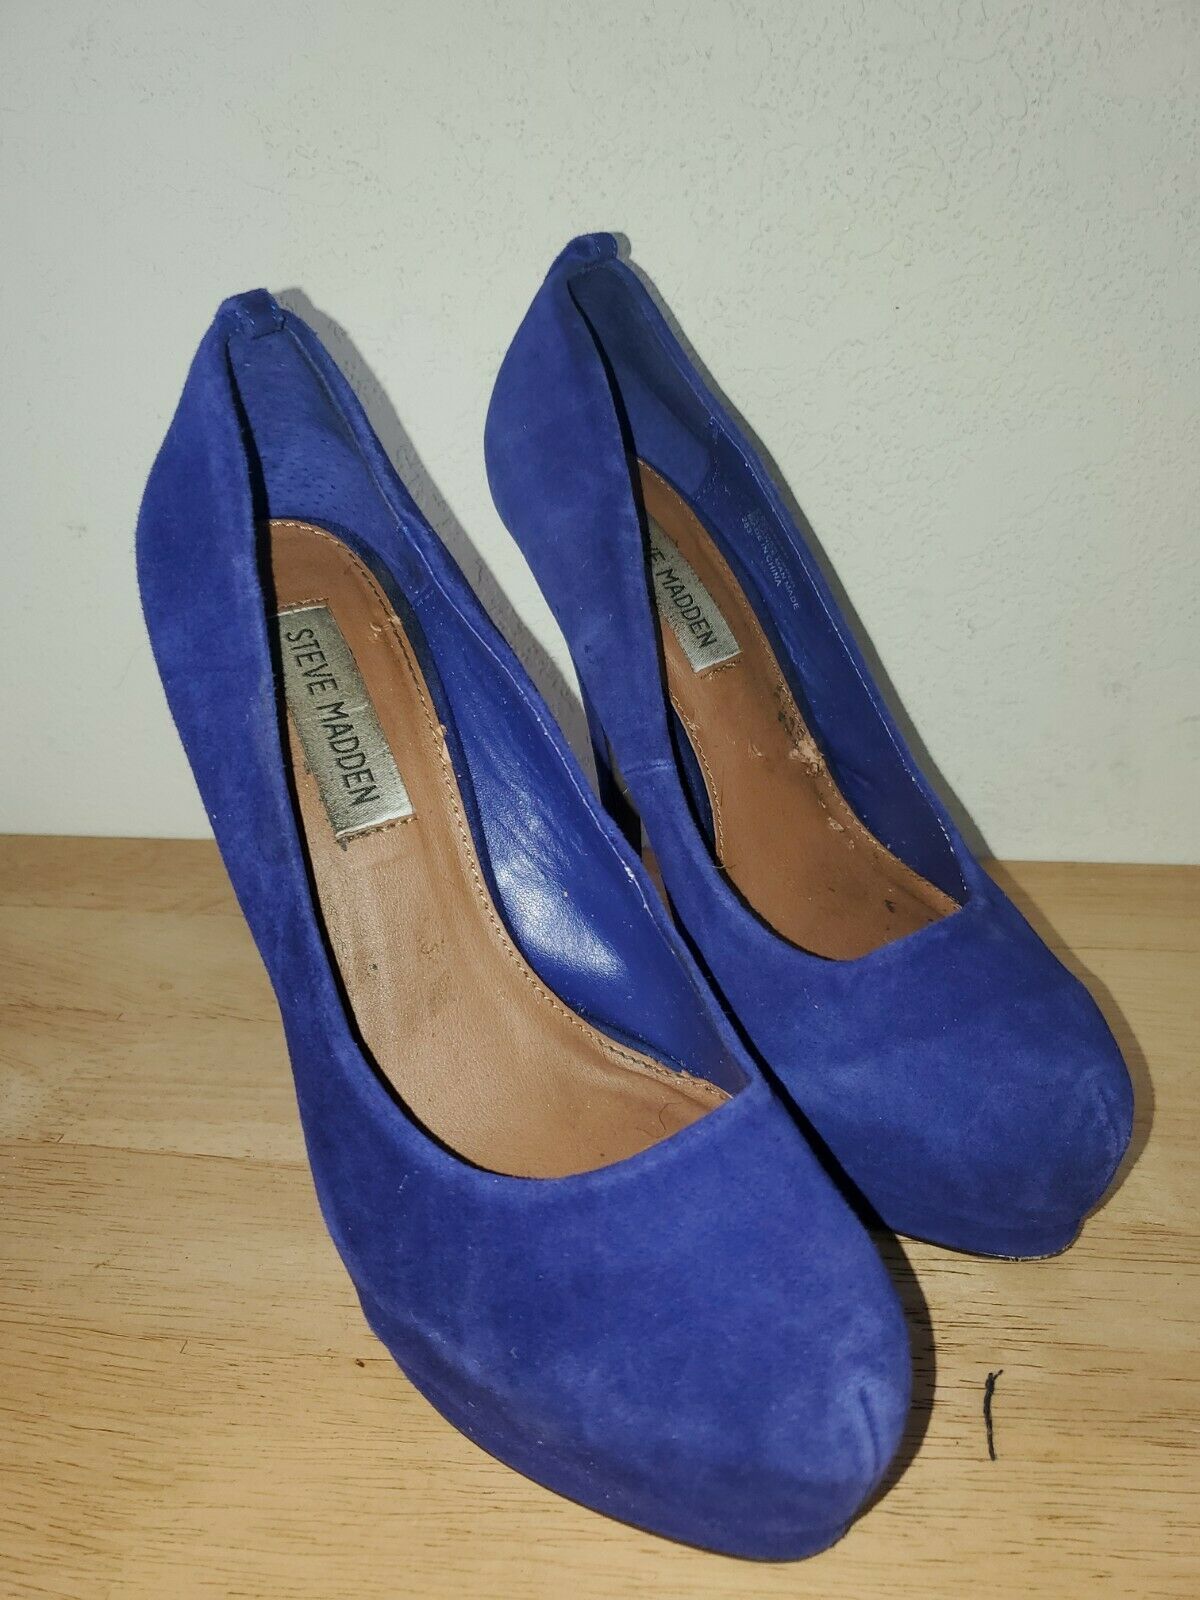 Primary image for Steve Madden Obsessed Women's size 7.5